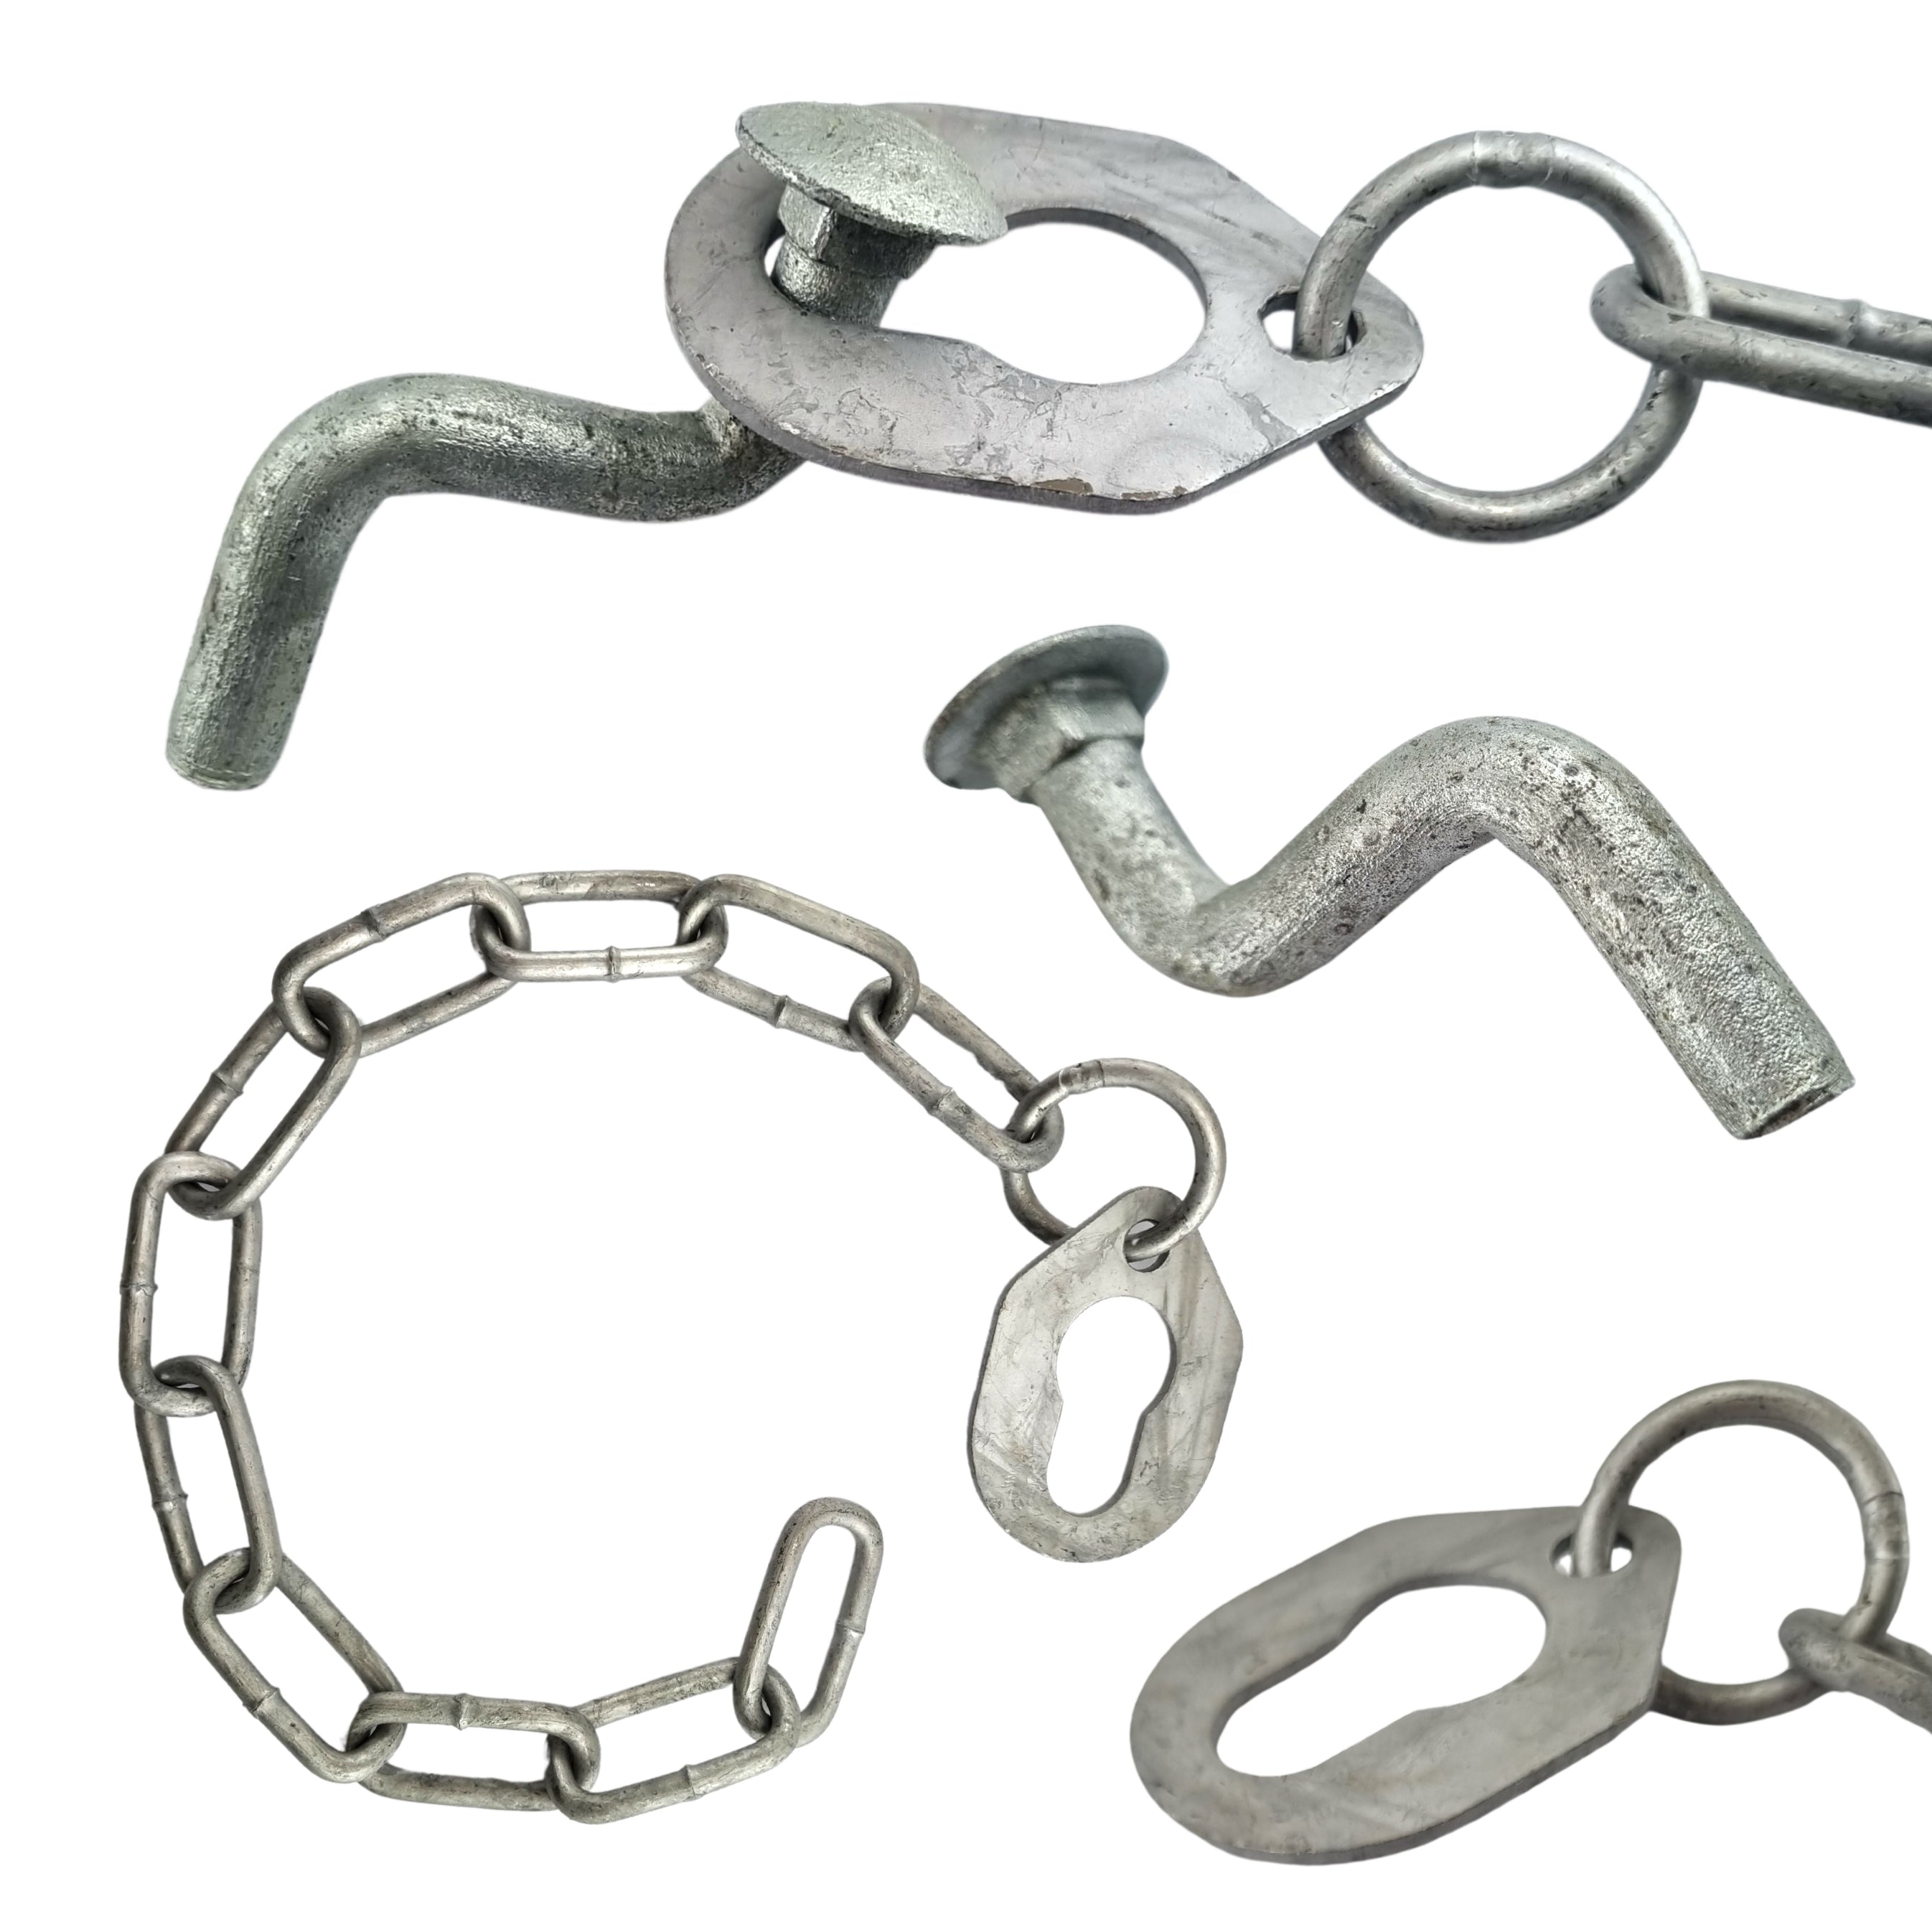 Chain Catch - Galvanised. Code: CAC4-2. Australian Made. Fence & Gate Fittings. Shop online chain.com.au. Australia wide shipping.